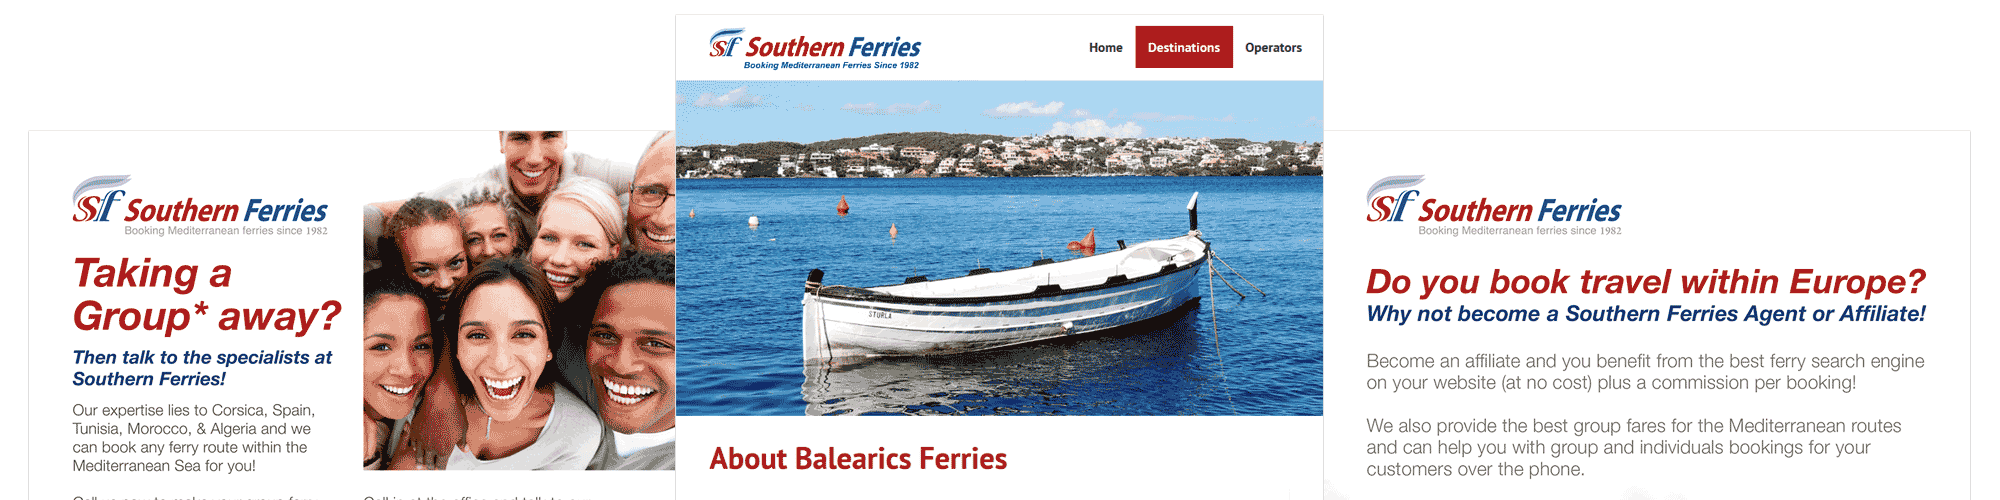 Screenshot of the Southern Ferries case study by Michael Saunders